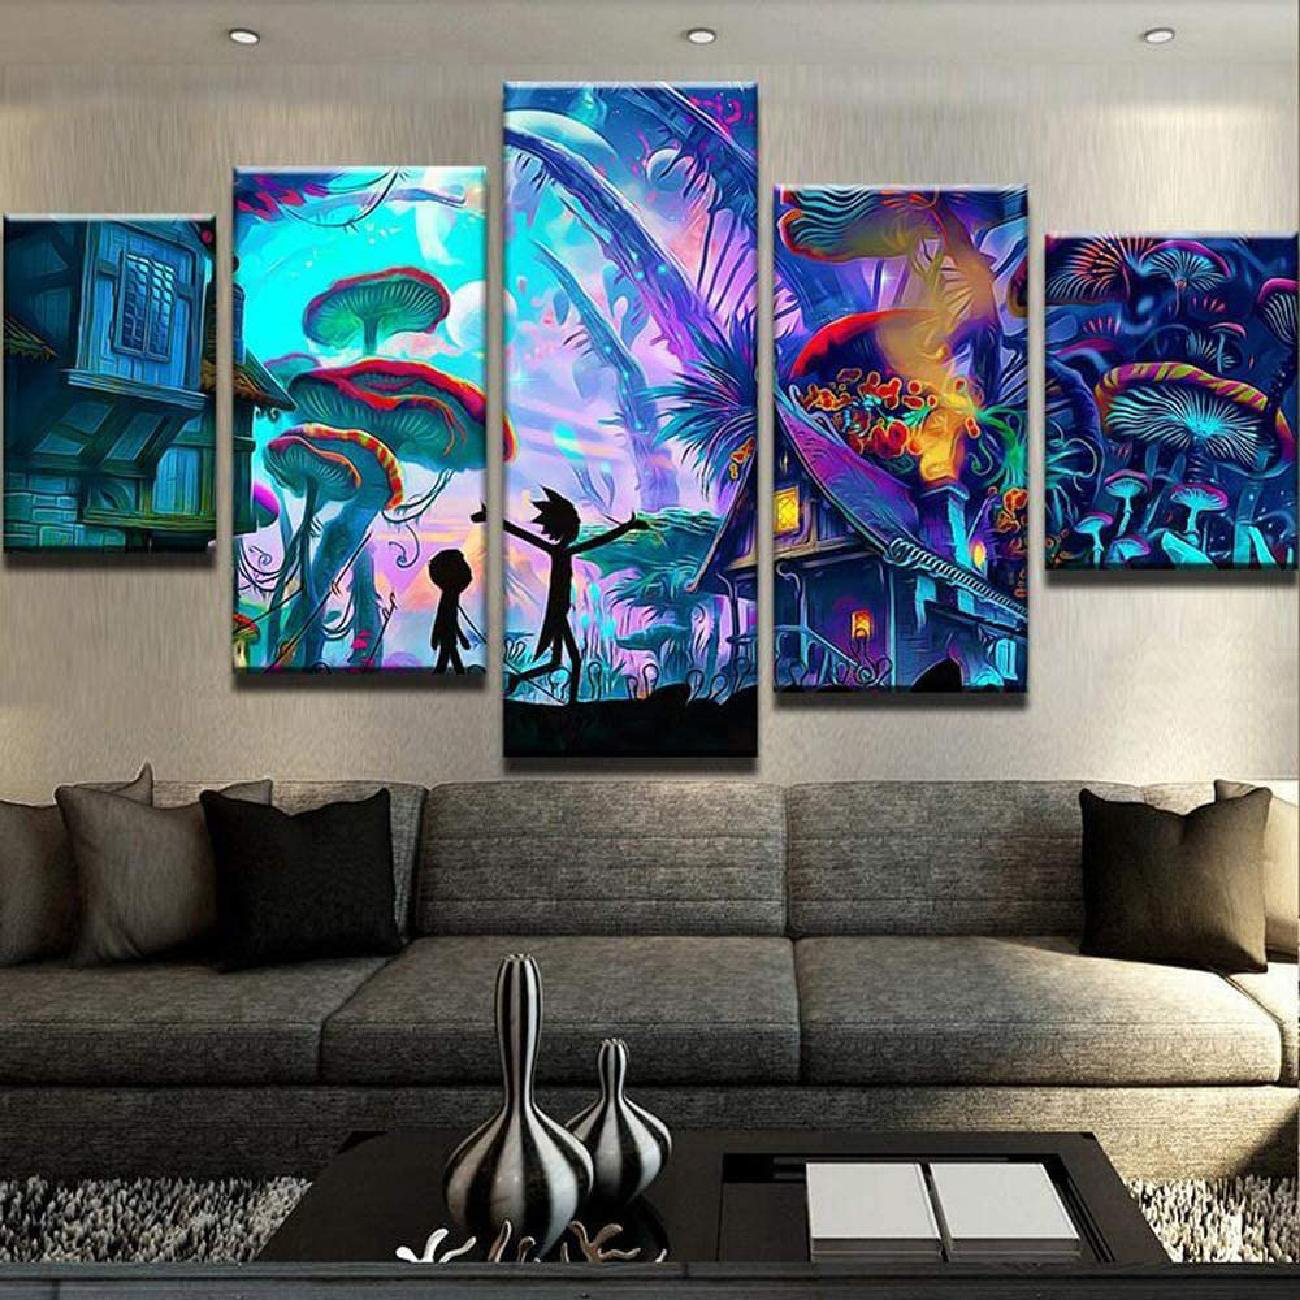 5 Pieces Rick And Morty Paintings Canvas Wall Art Modular Pictures Home Decor 